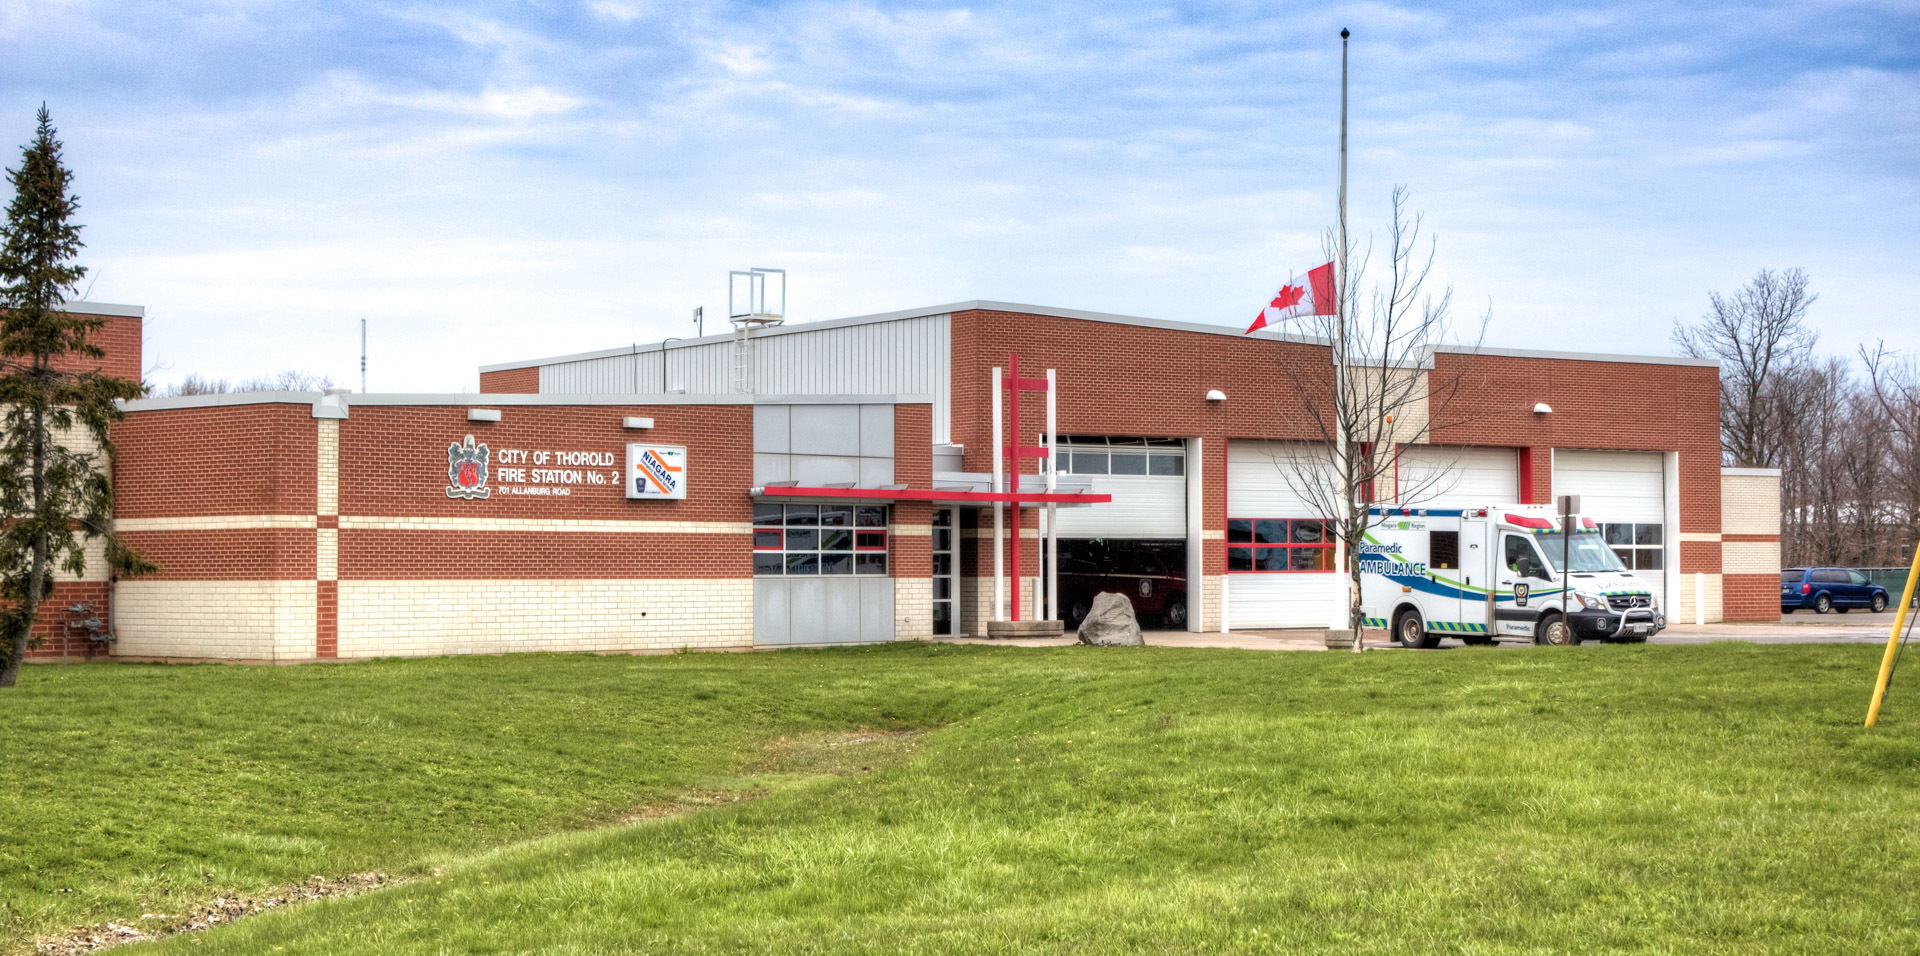 Thorold Fire Station No. 2 